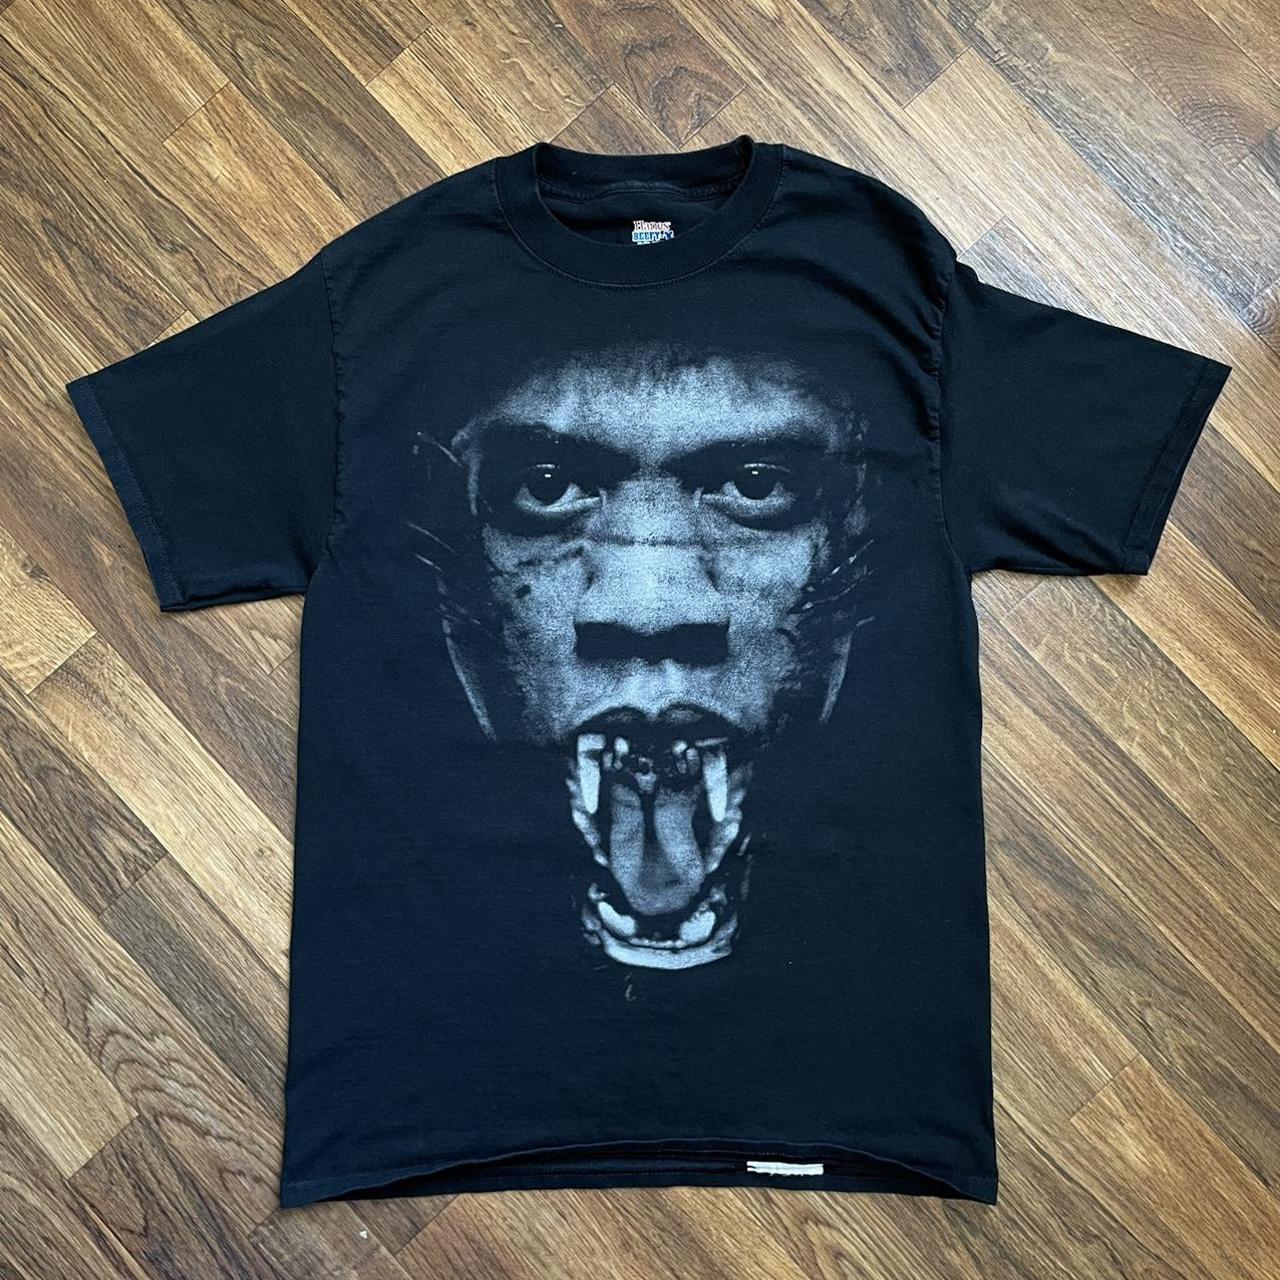 Kanye West Jay Z Watch The Throne 2011 Tour Tee... - Depop